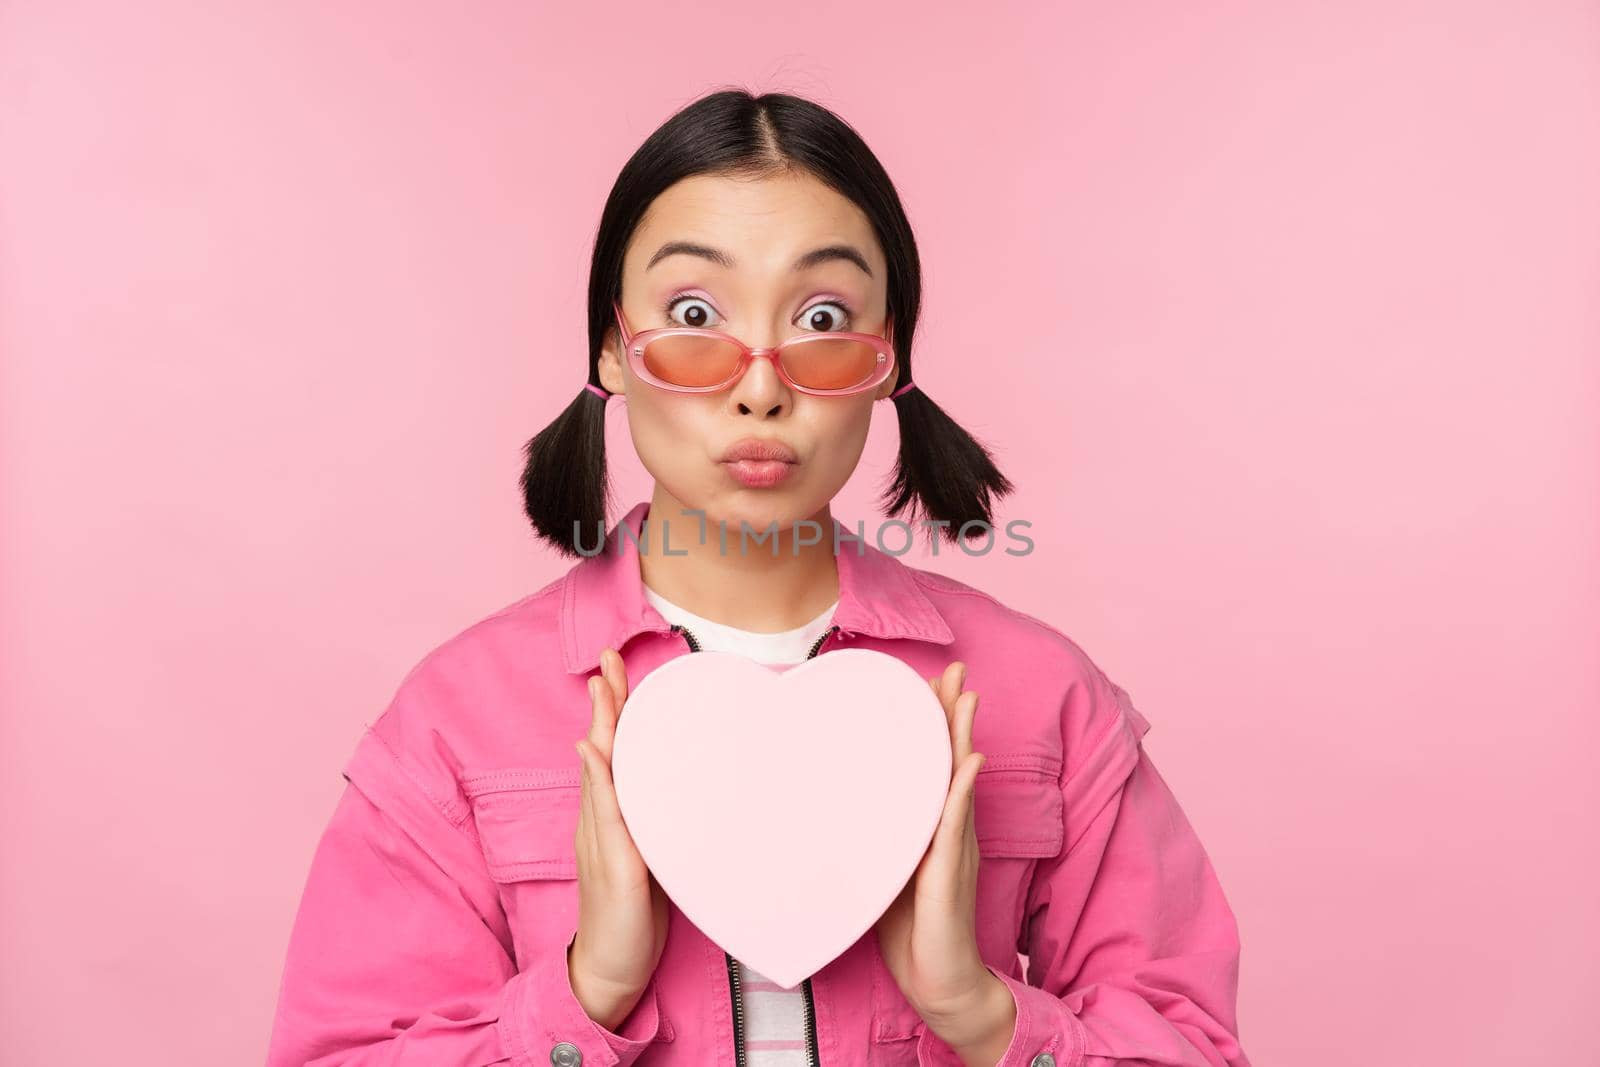 Cute asian girl showing heart shaped box with gift, looking surprised and excited, romantic present concept, wearing sunglasses, standing over pink background.